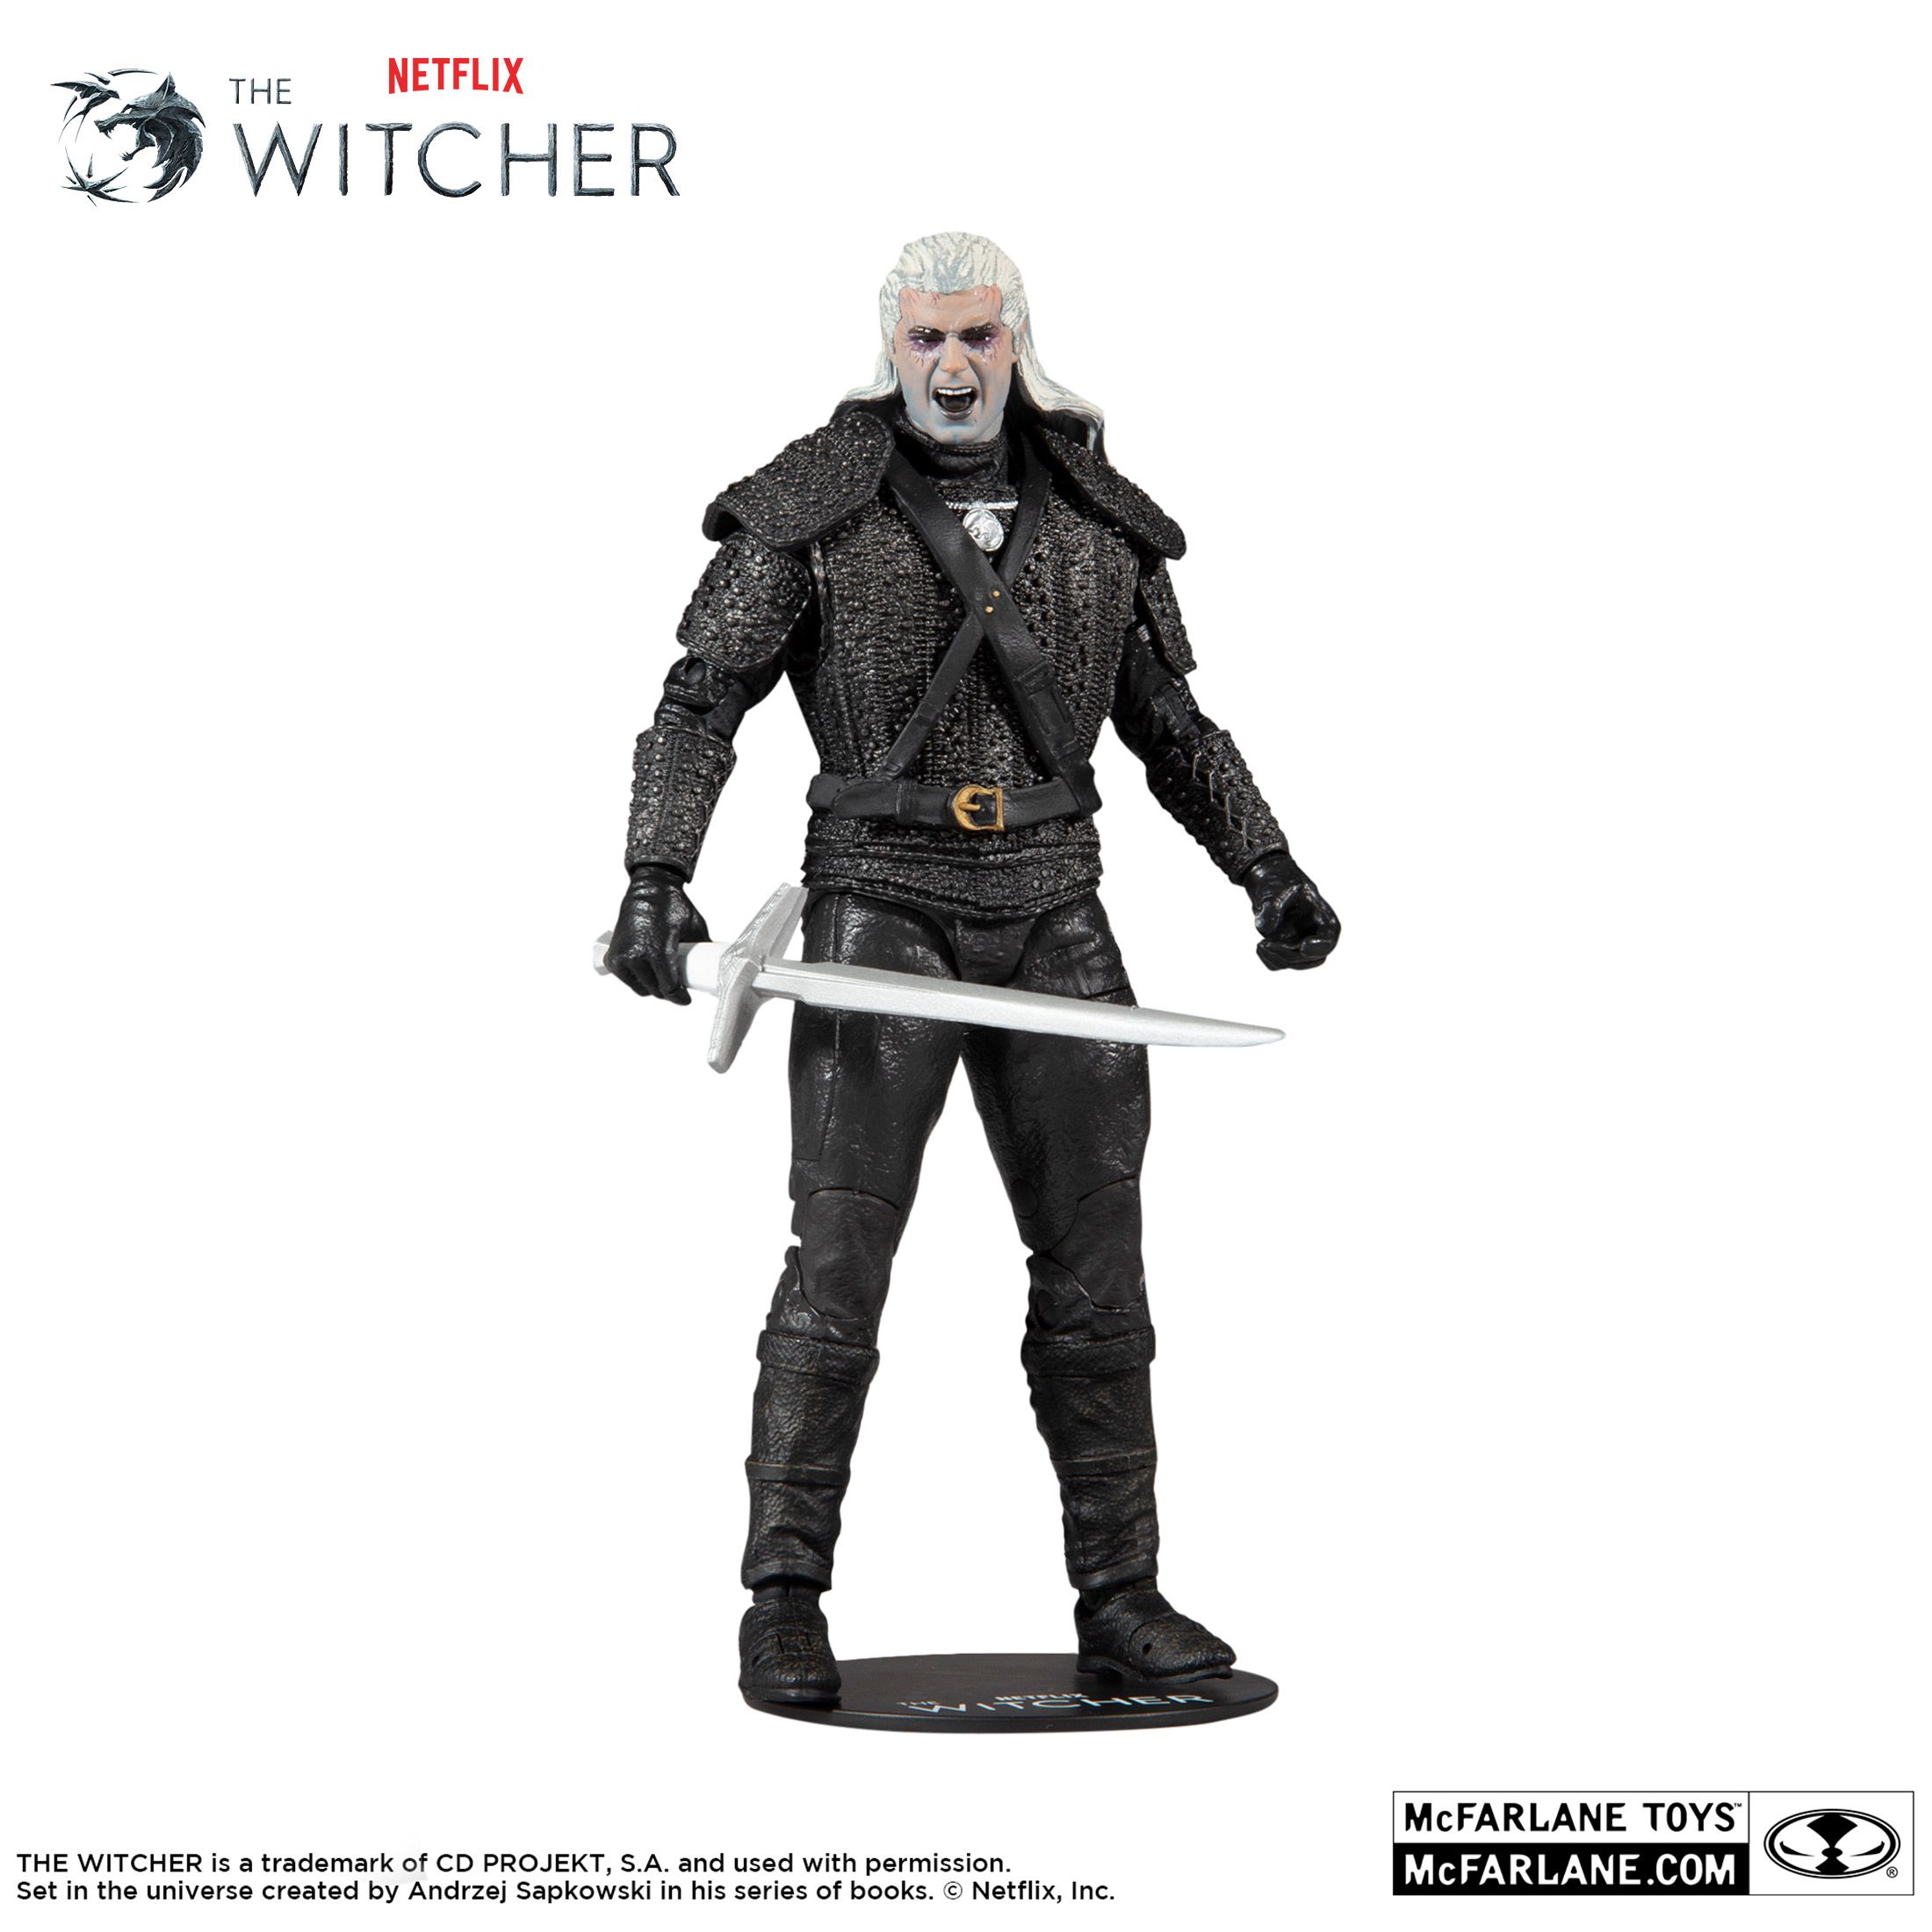 The Witcher Netflix McFarlane Toys images #2